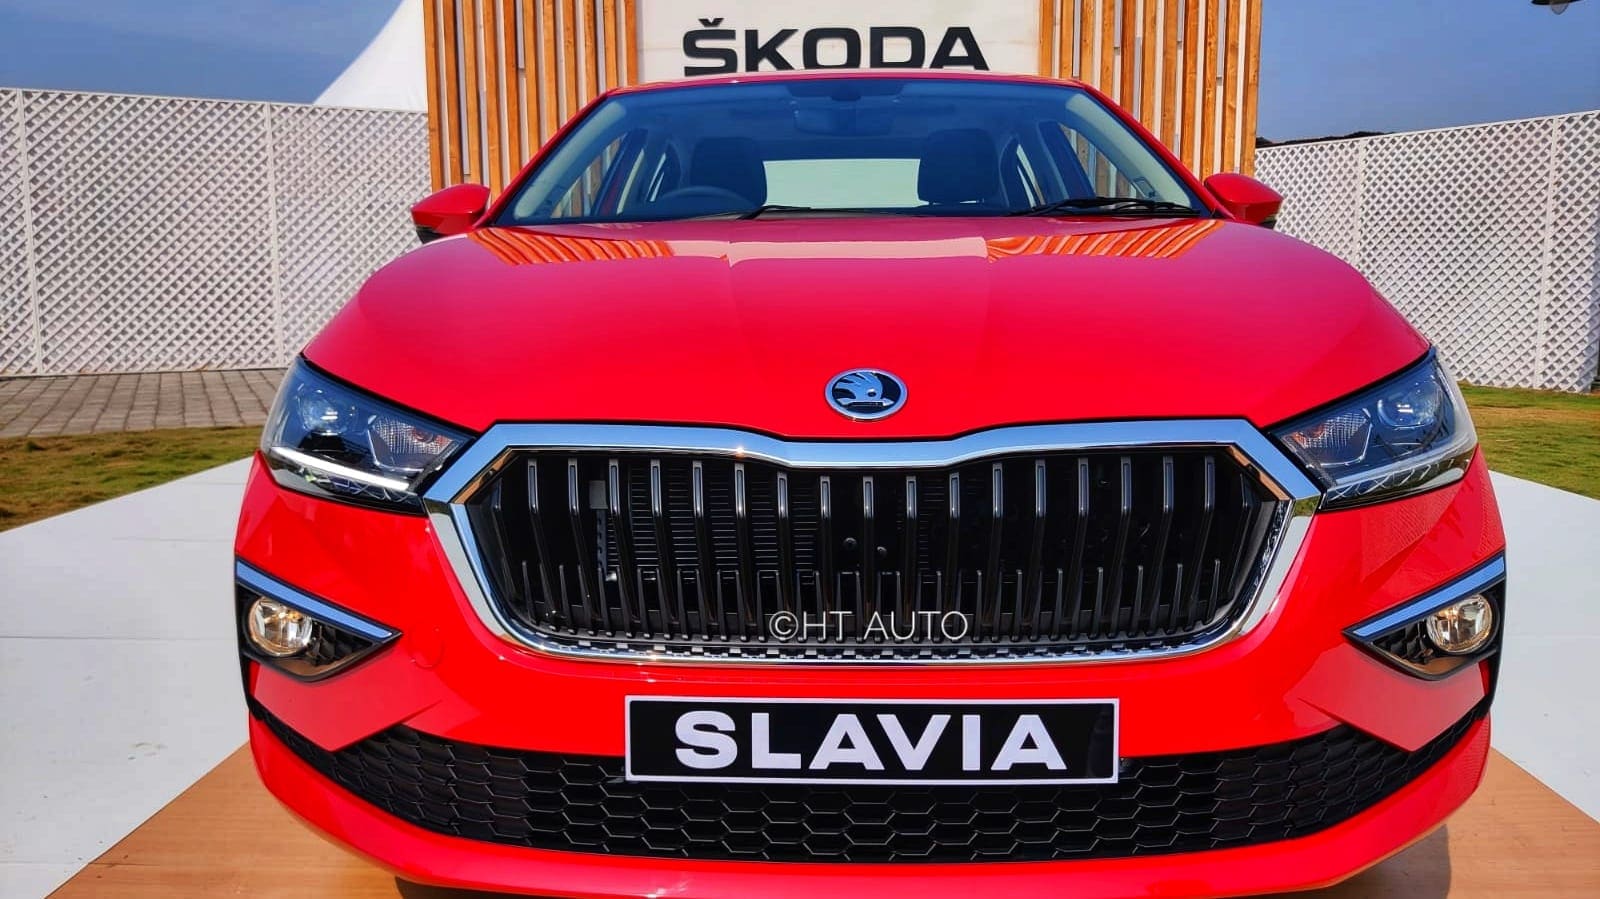 Skoda's Slavia has a very European exterior styling with modern elements intertwined.